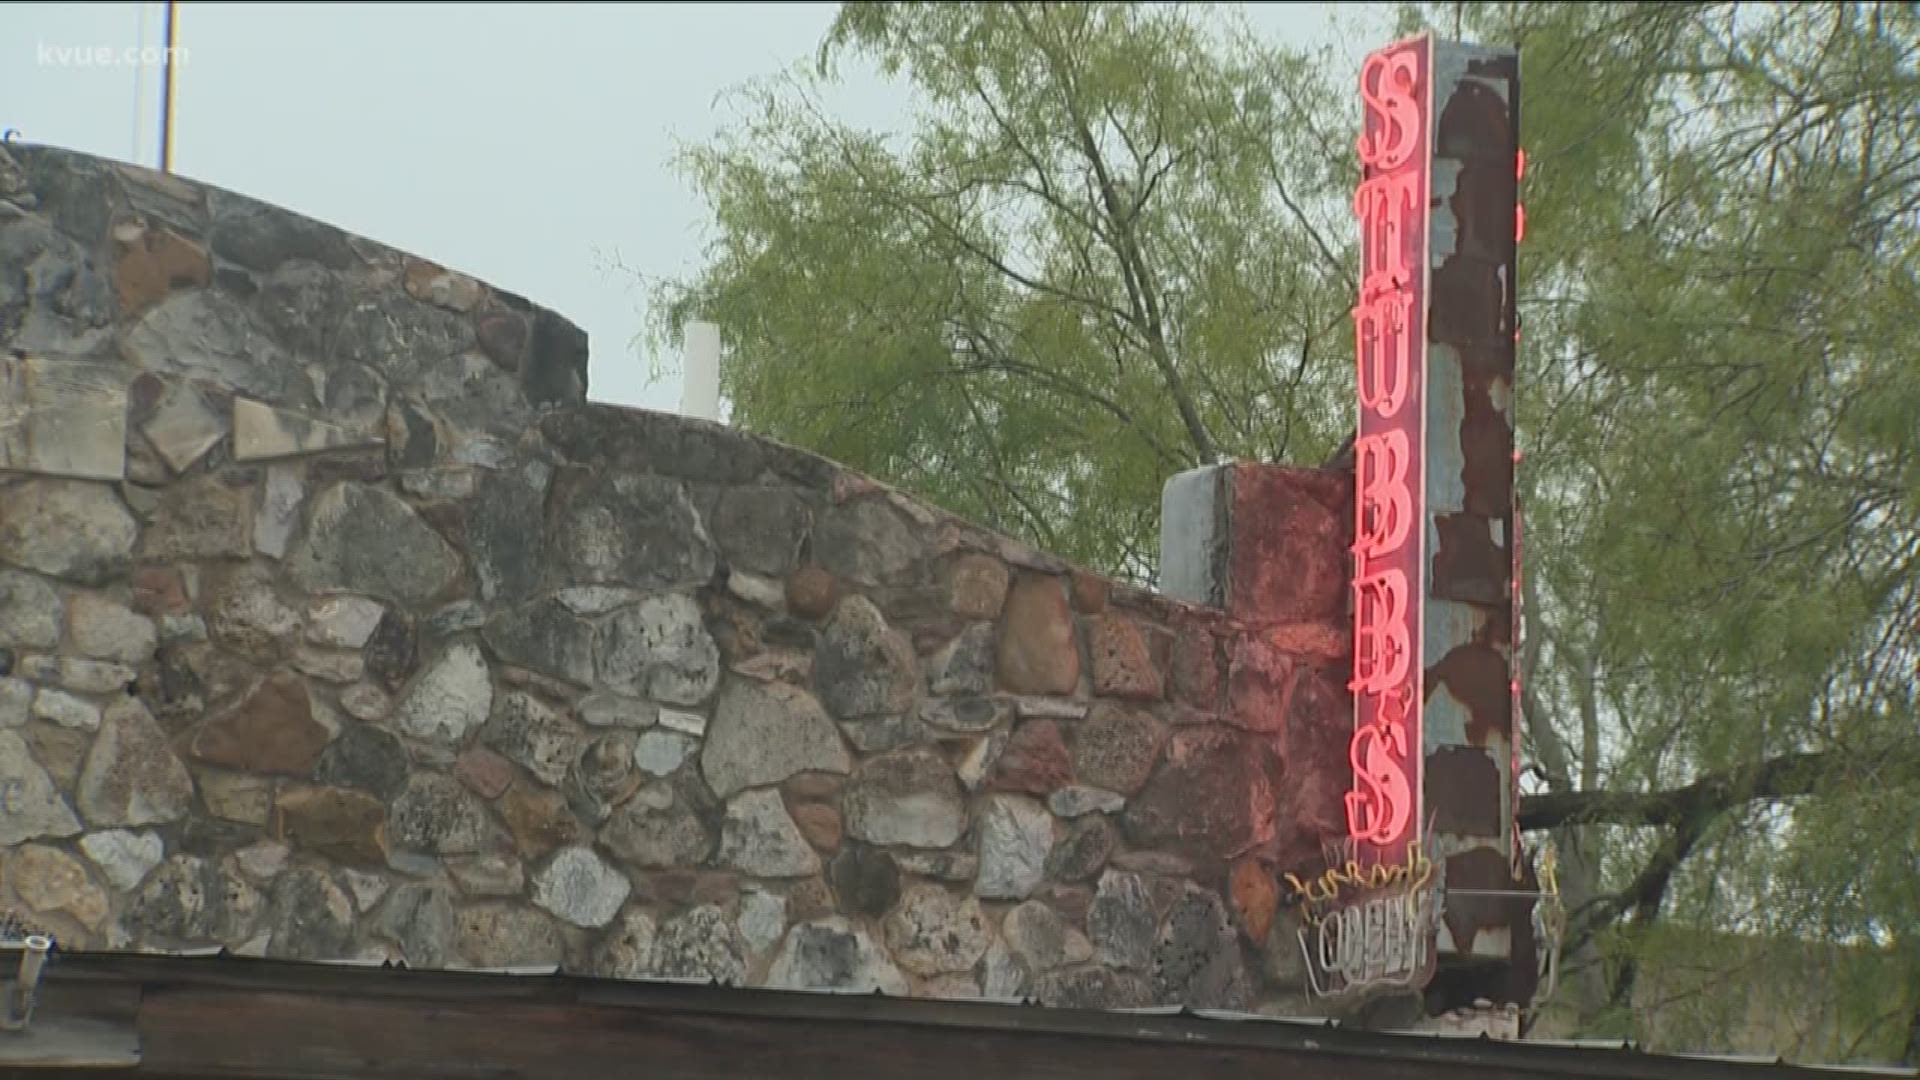 A trademark lawsuit was resolved, allowing the restaurant and venue to stay open under the famous Stubb's name.